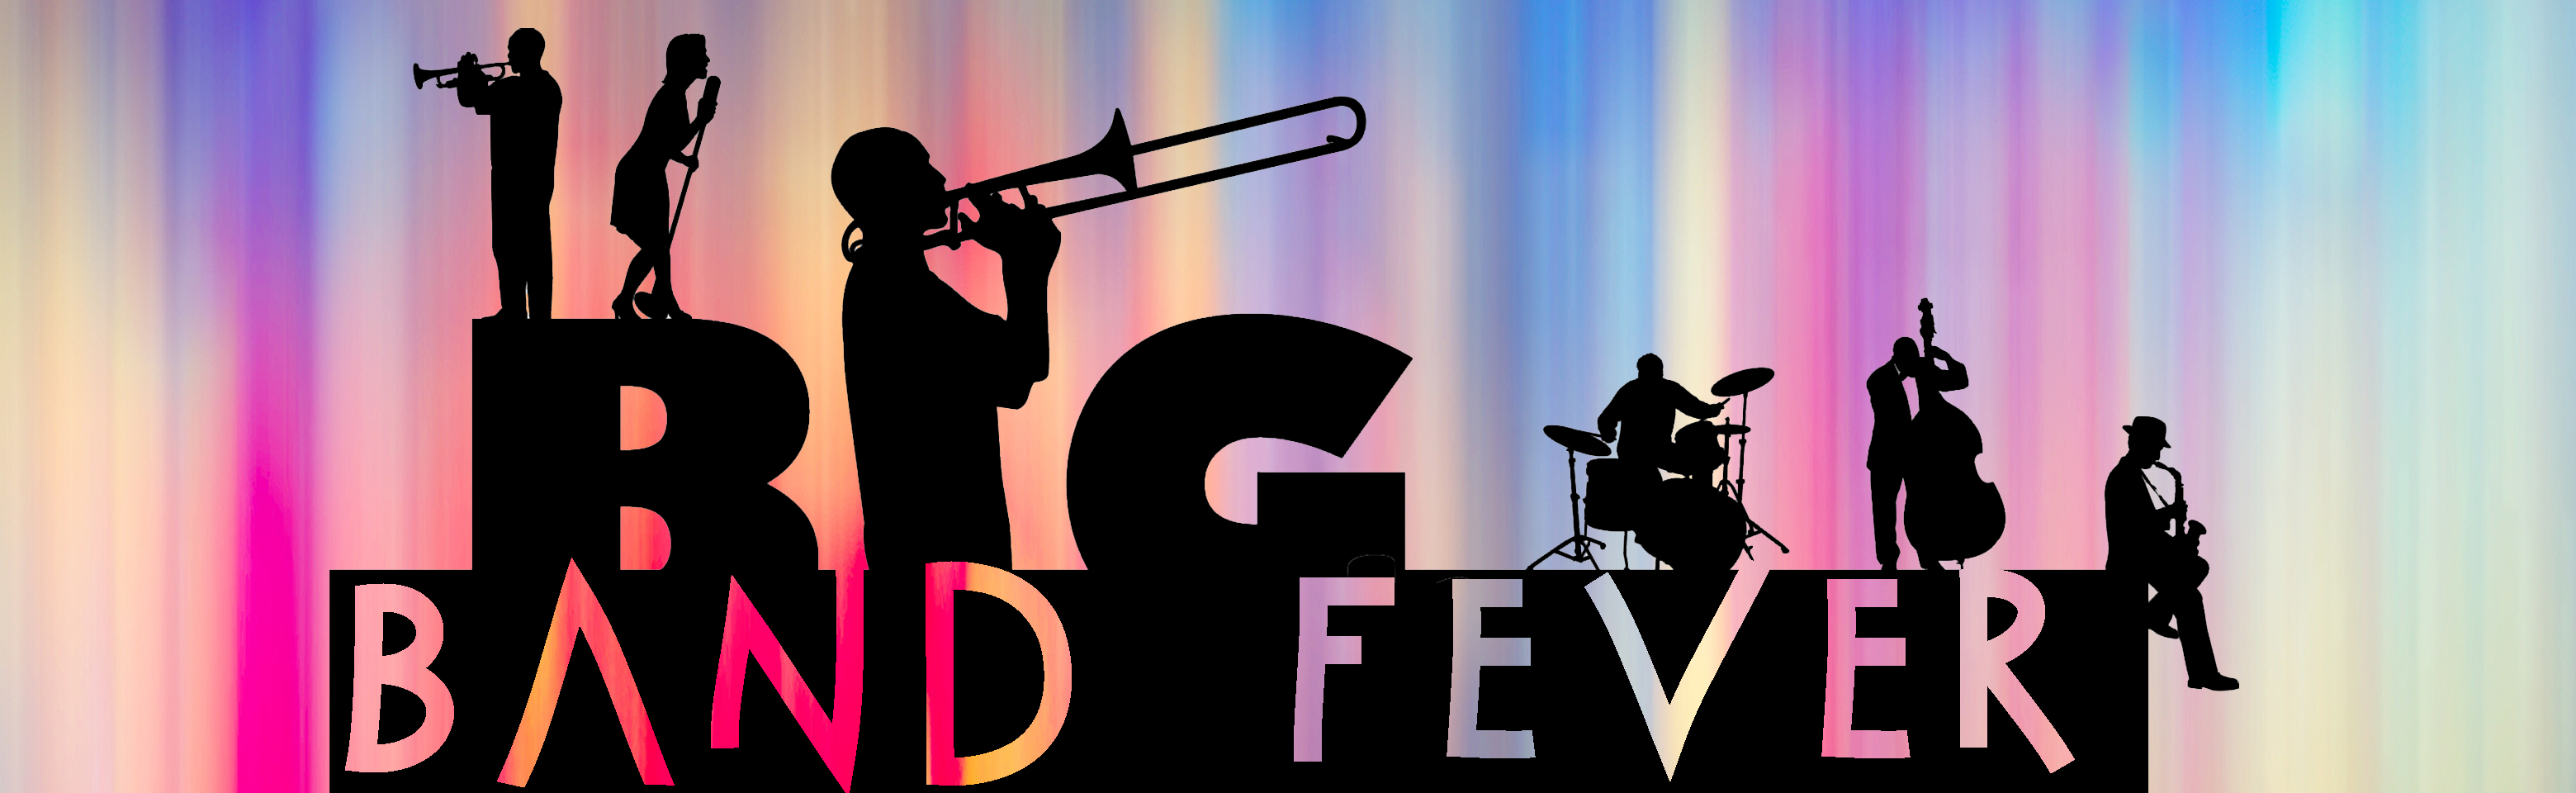 Jazz Orchestra Spreads 'Big Band Fever'